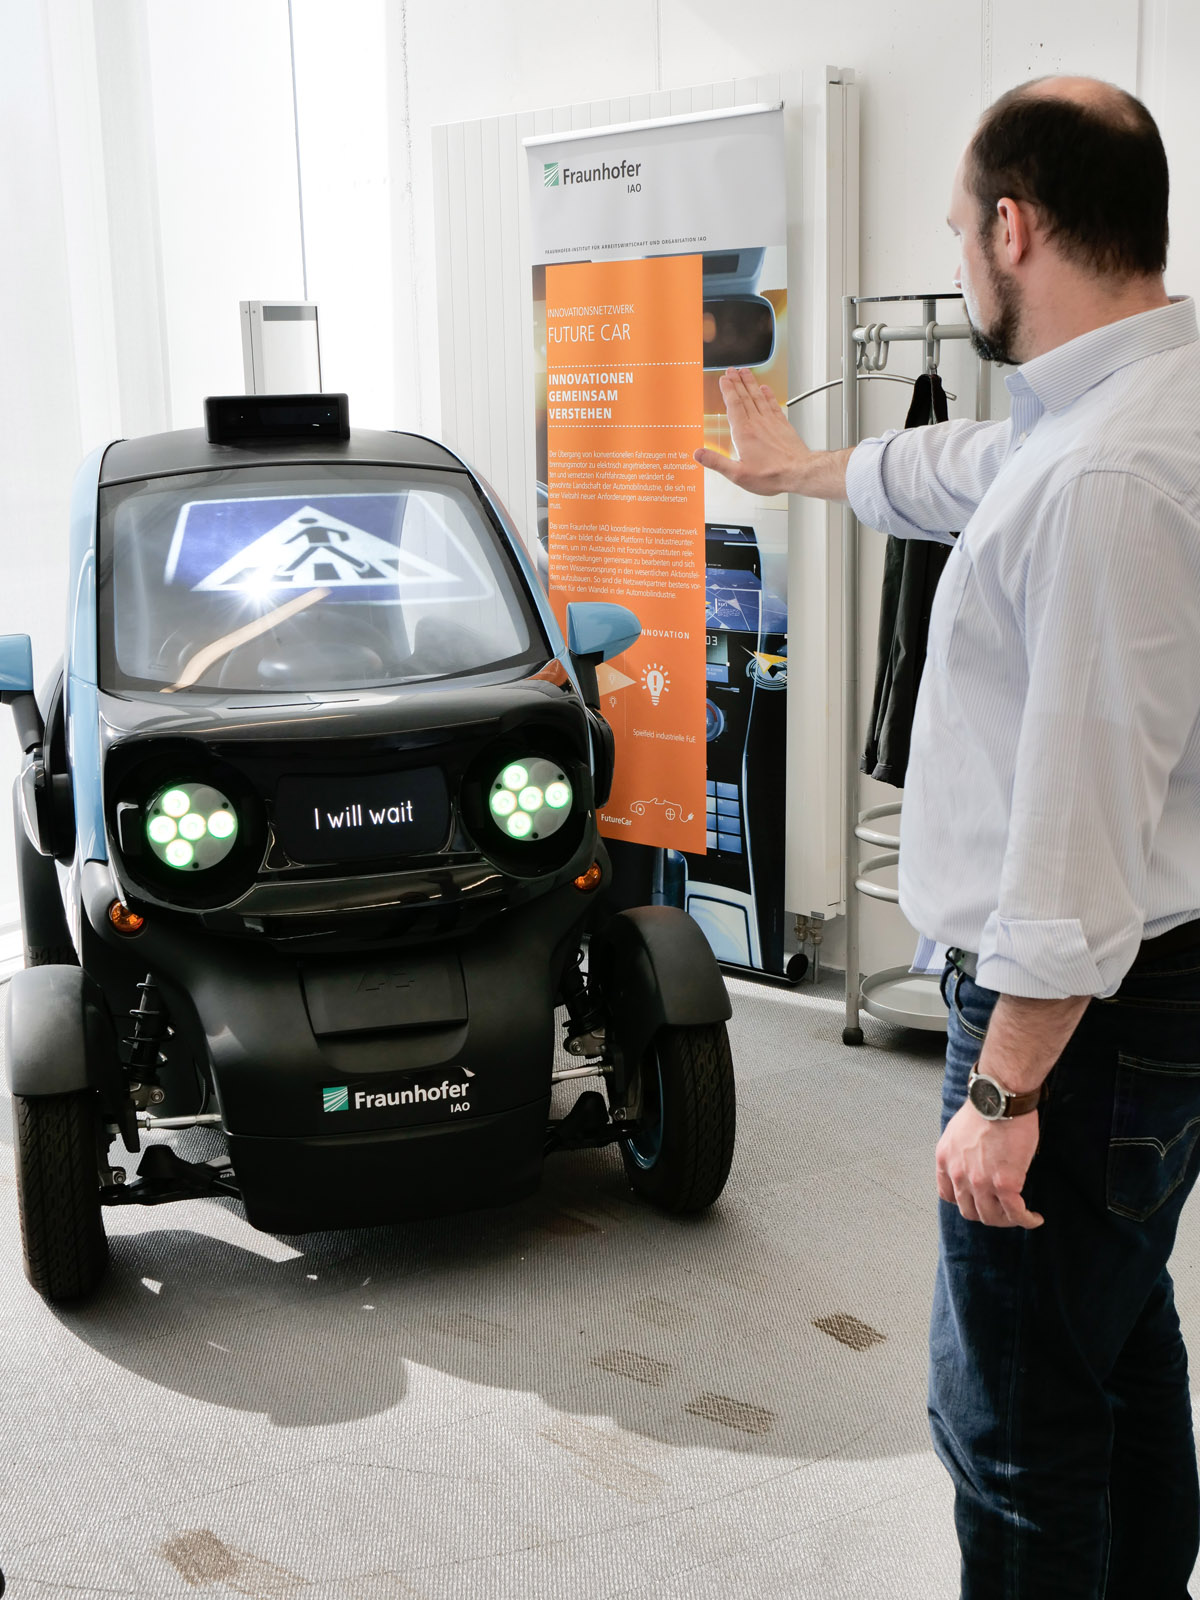 The Mobility Innovation Lab is a modern research facility for prototyping and creative workshops. A converted car interacts with a pedestrian.